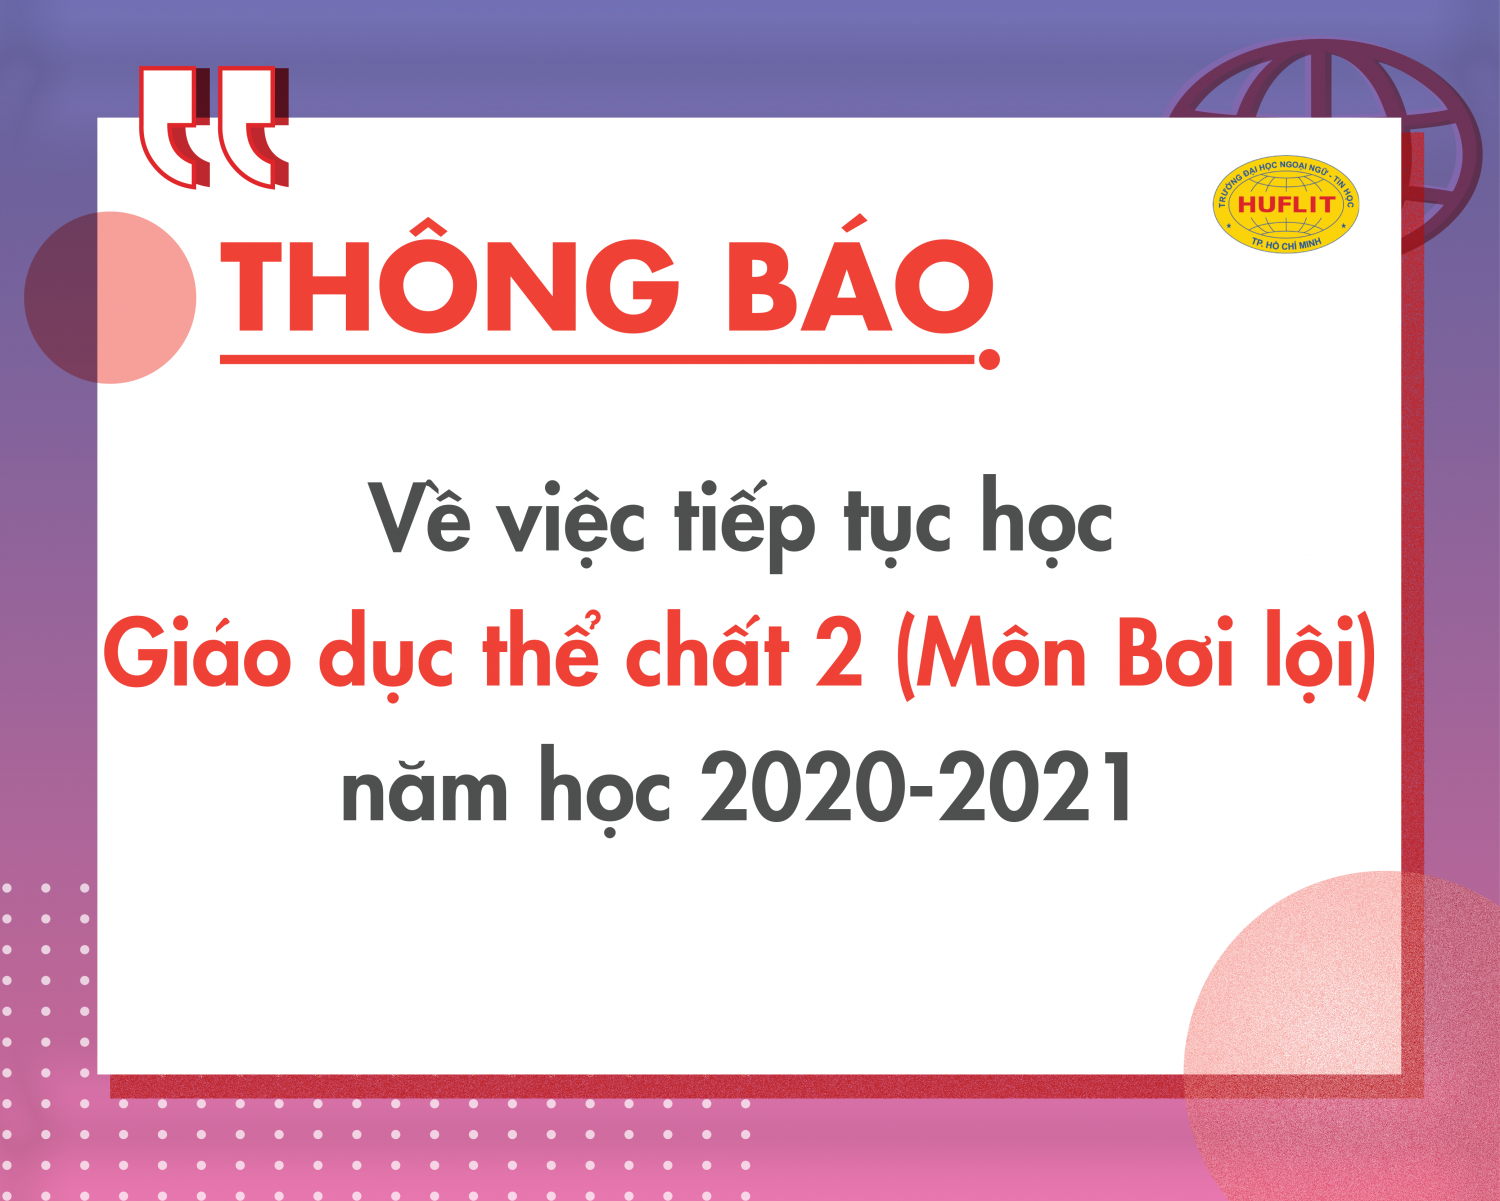 16.2.2022 giao duc the chat 2